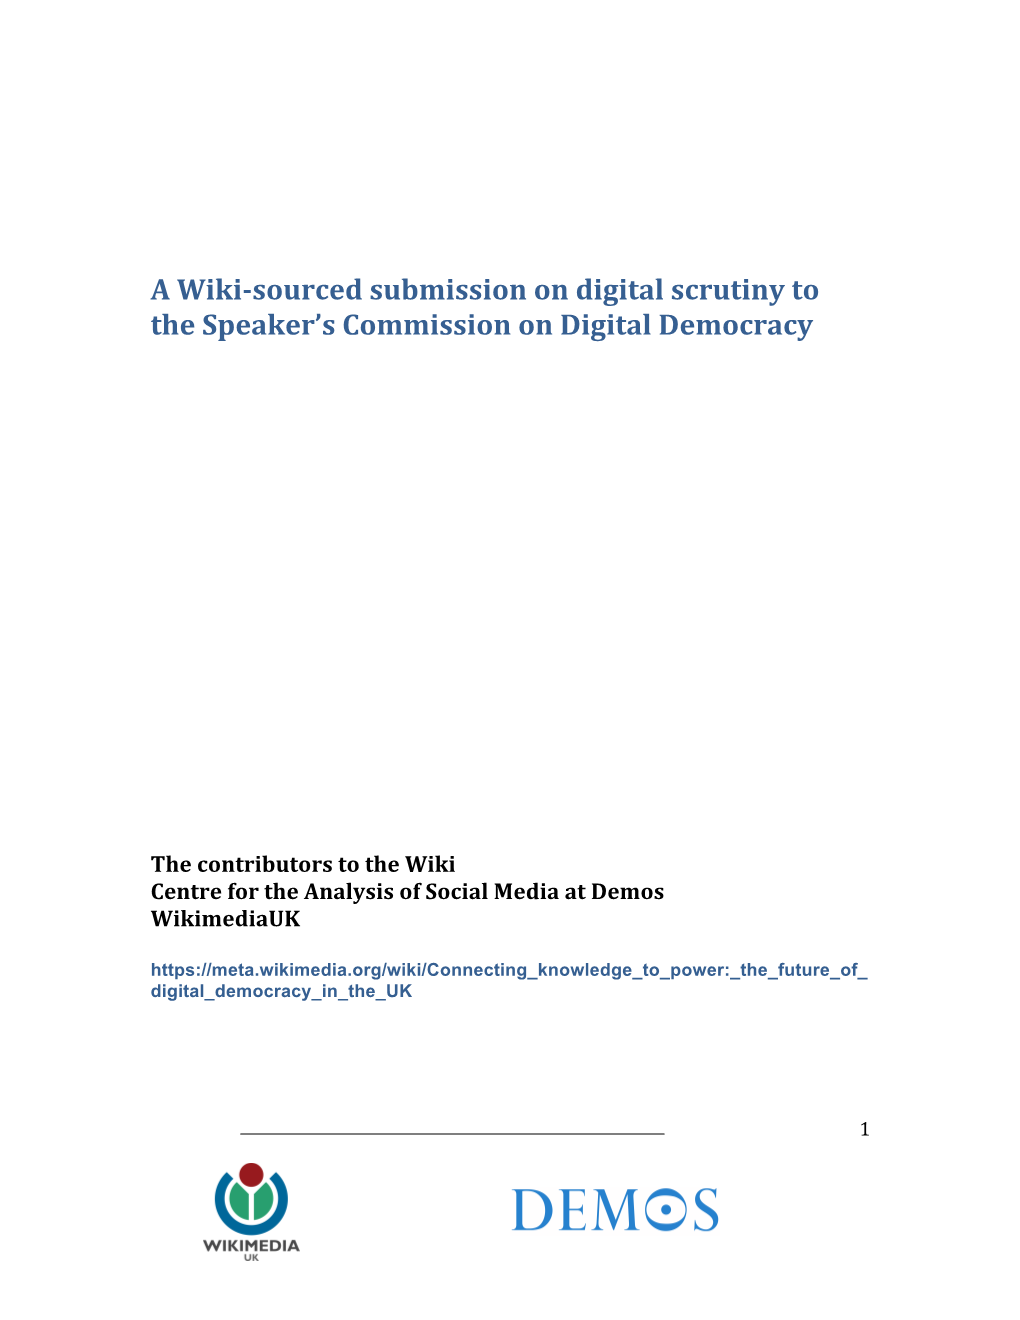 A Wiki-Sourced Submission on Digital Scrutiny to the Speaker’S Commission on Digital Democracy